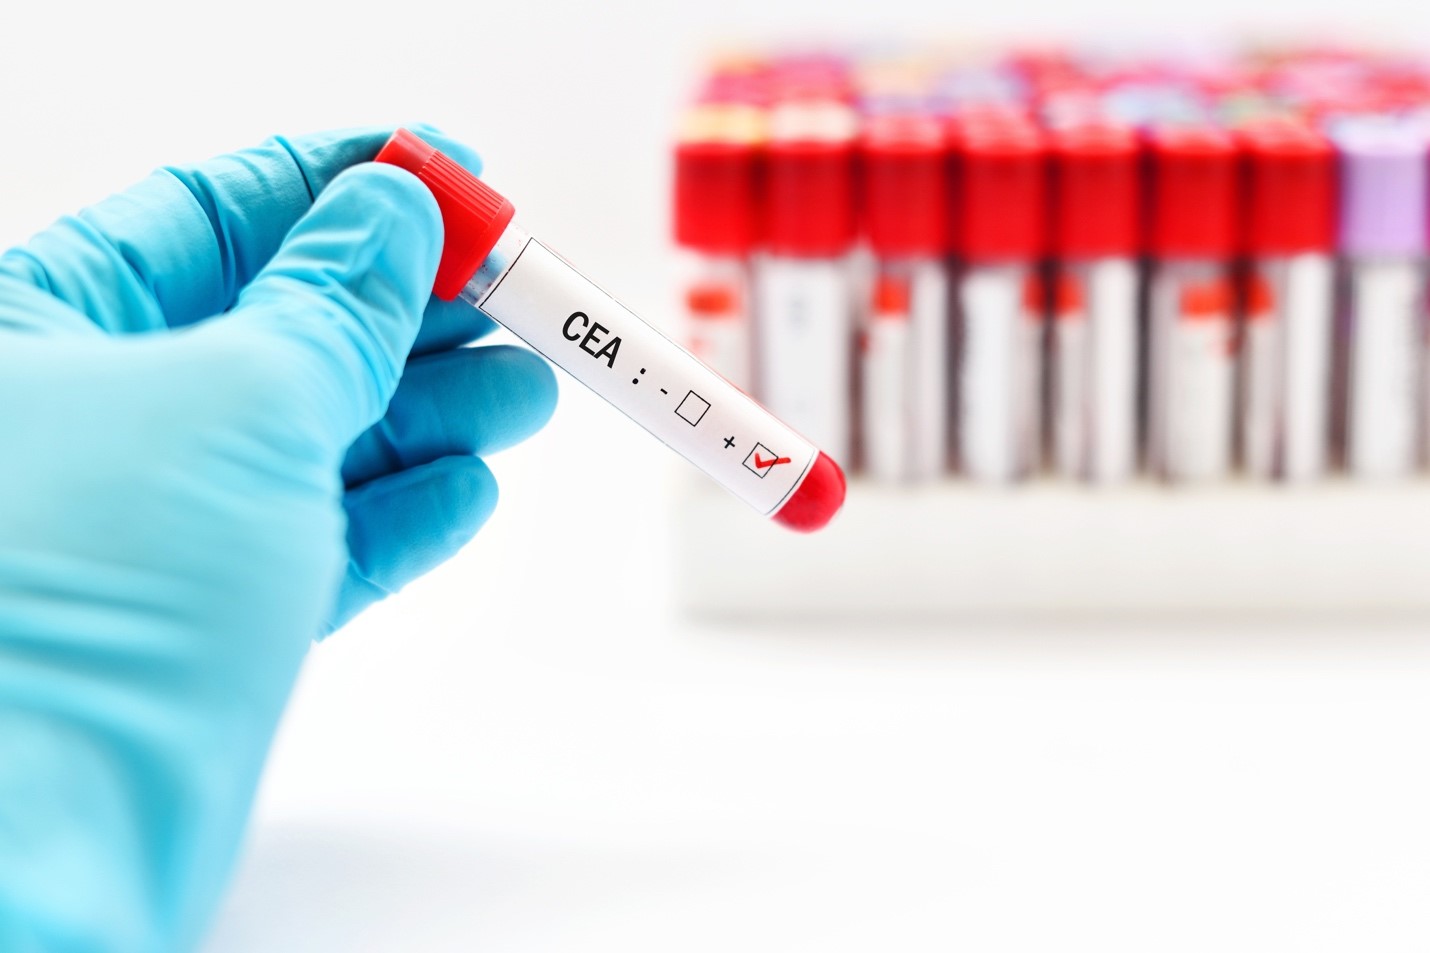 What is a CEA blood test?